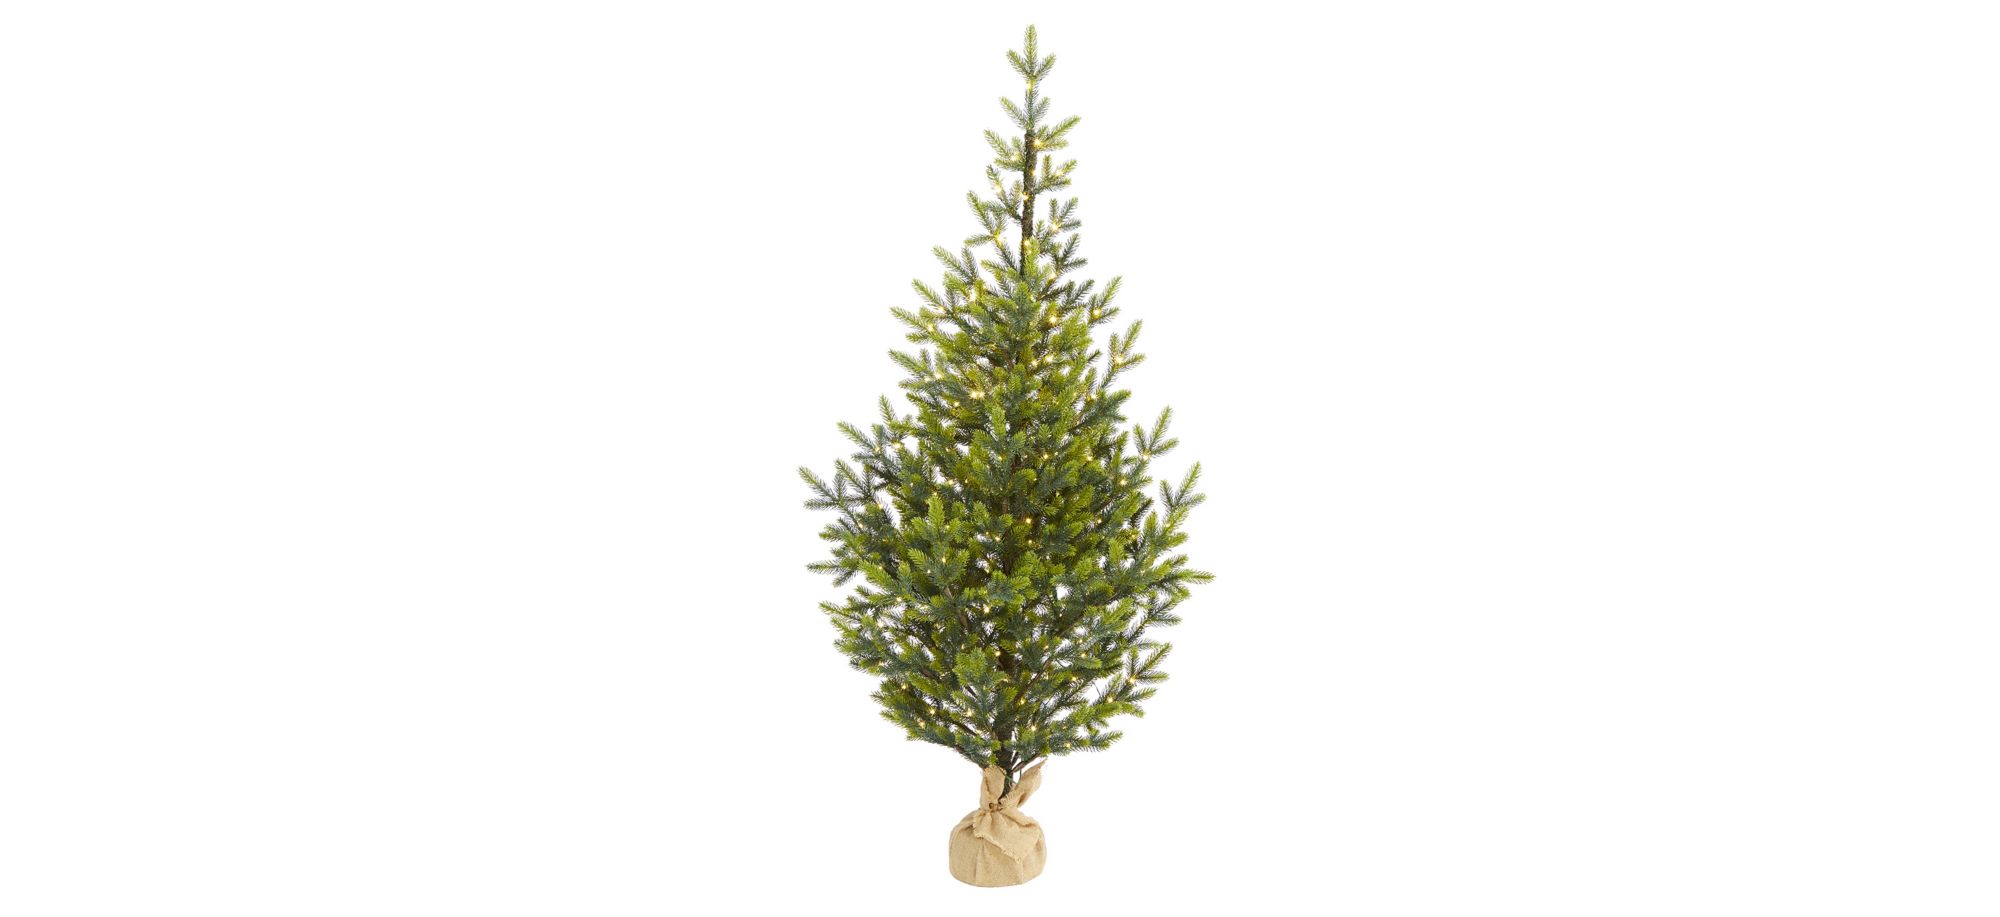 5ft. Pre-Lit Fraser Fir "Natural Look" Artificial Christmas Tree w/ Burlap Planter in Green by Bellanest